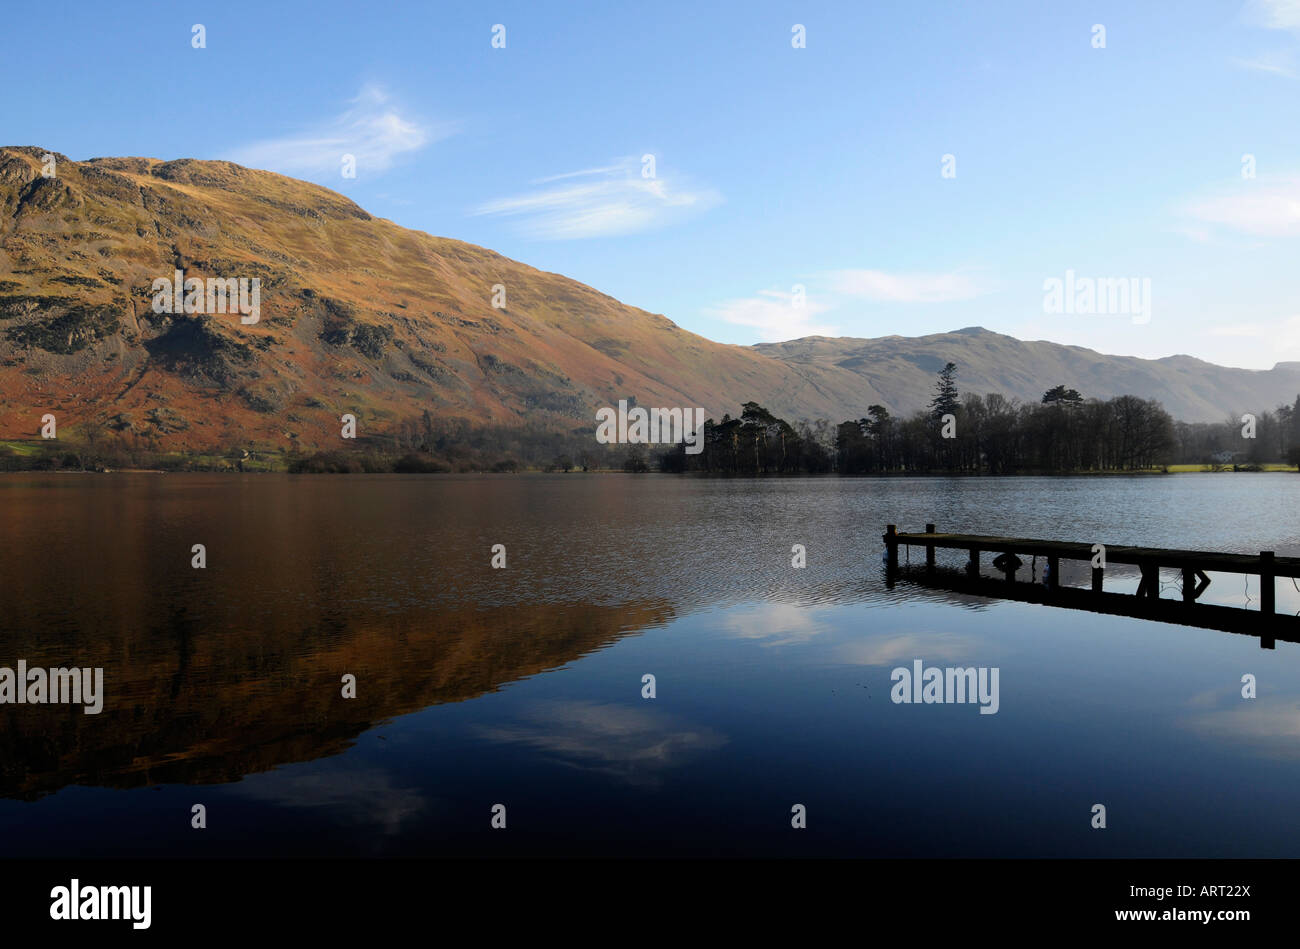 View of Southern end of Ullswater and jetty, Lake Disrtrict, England Stock Photo